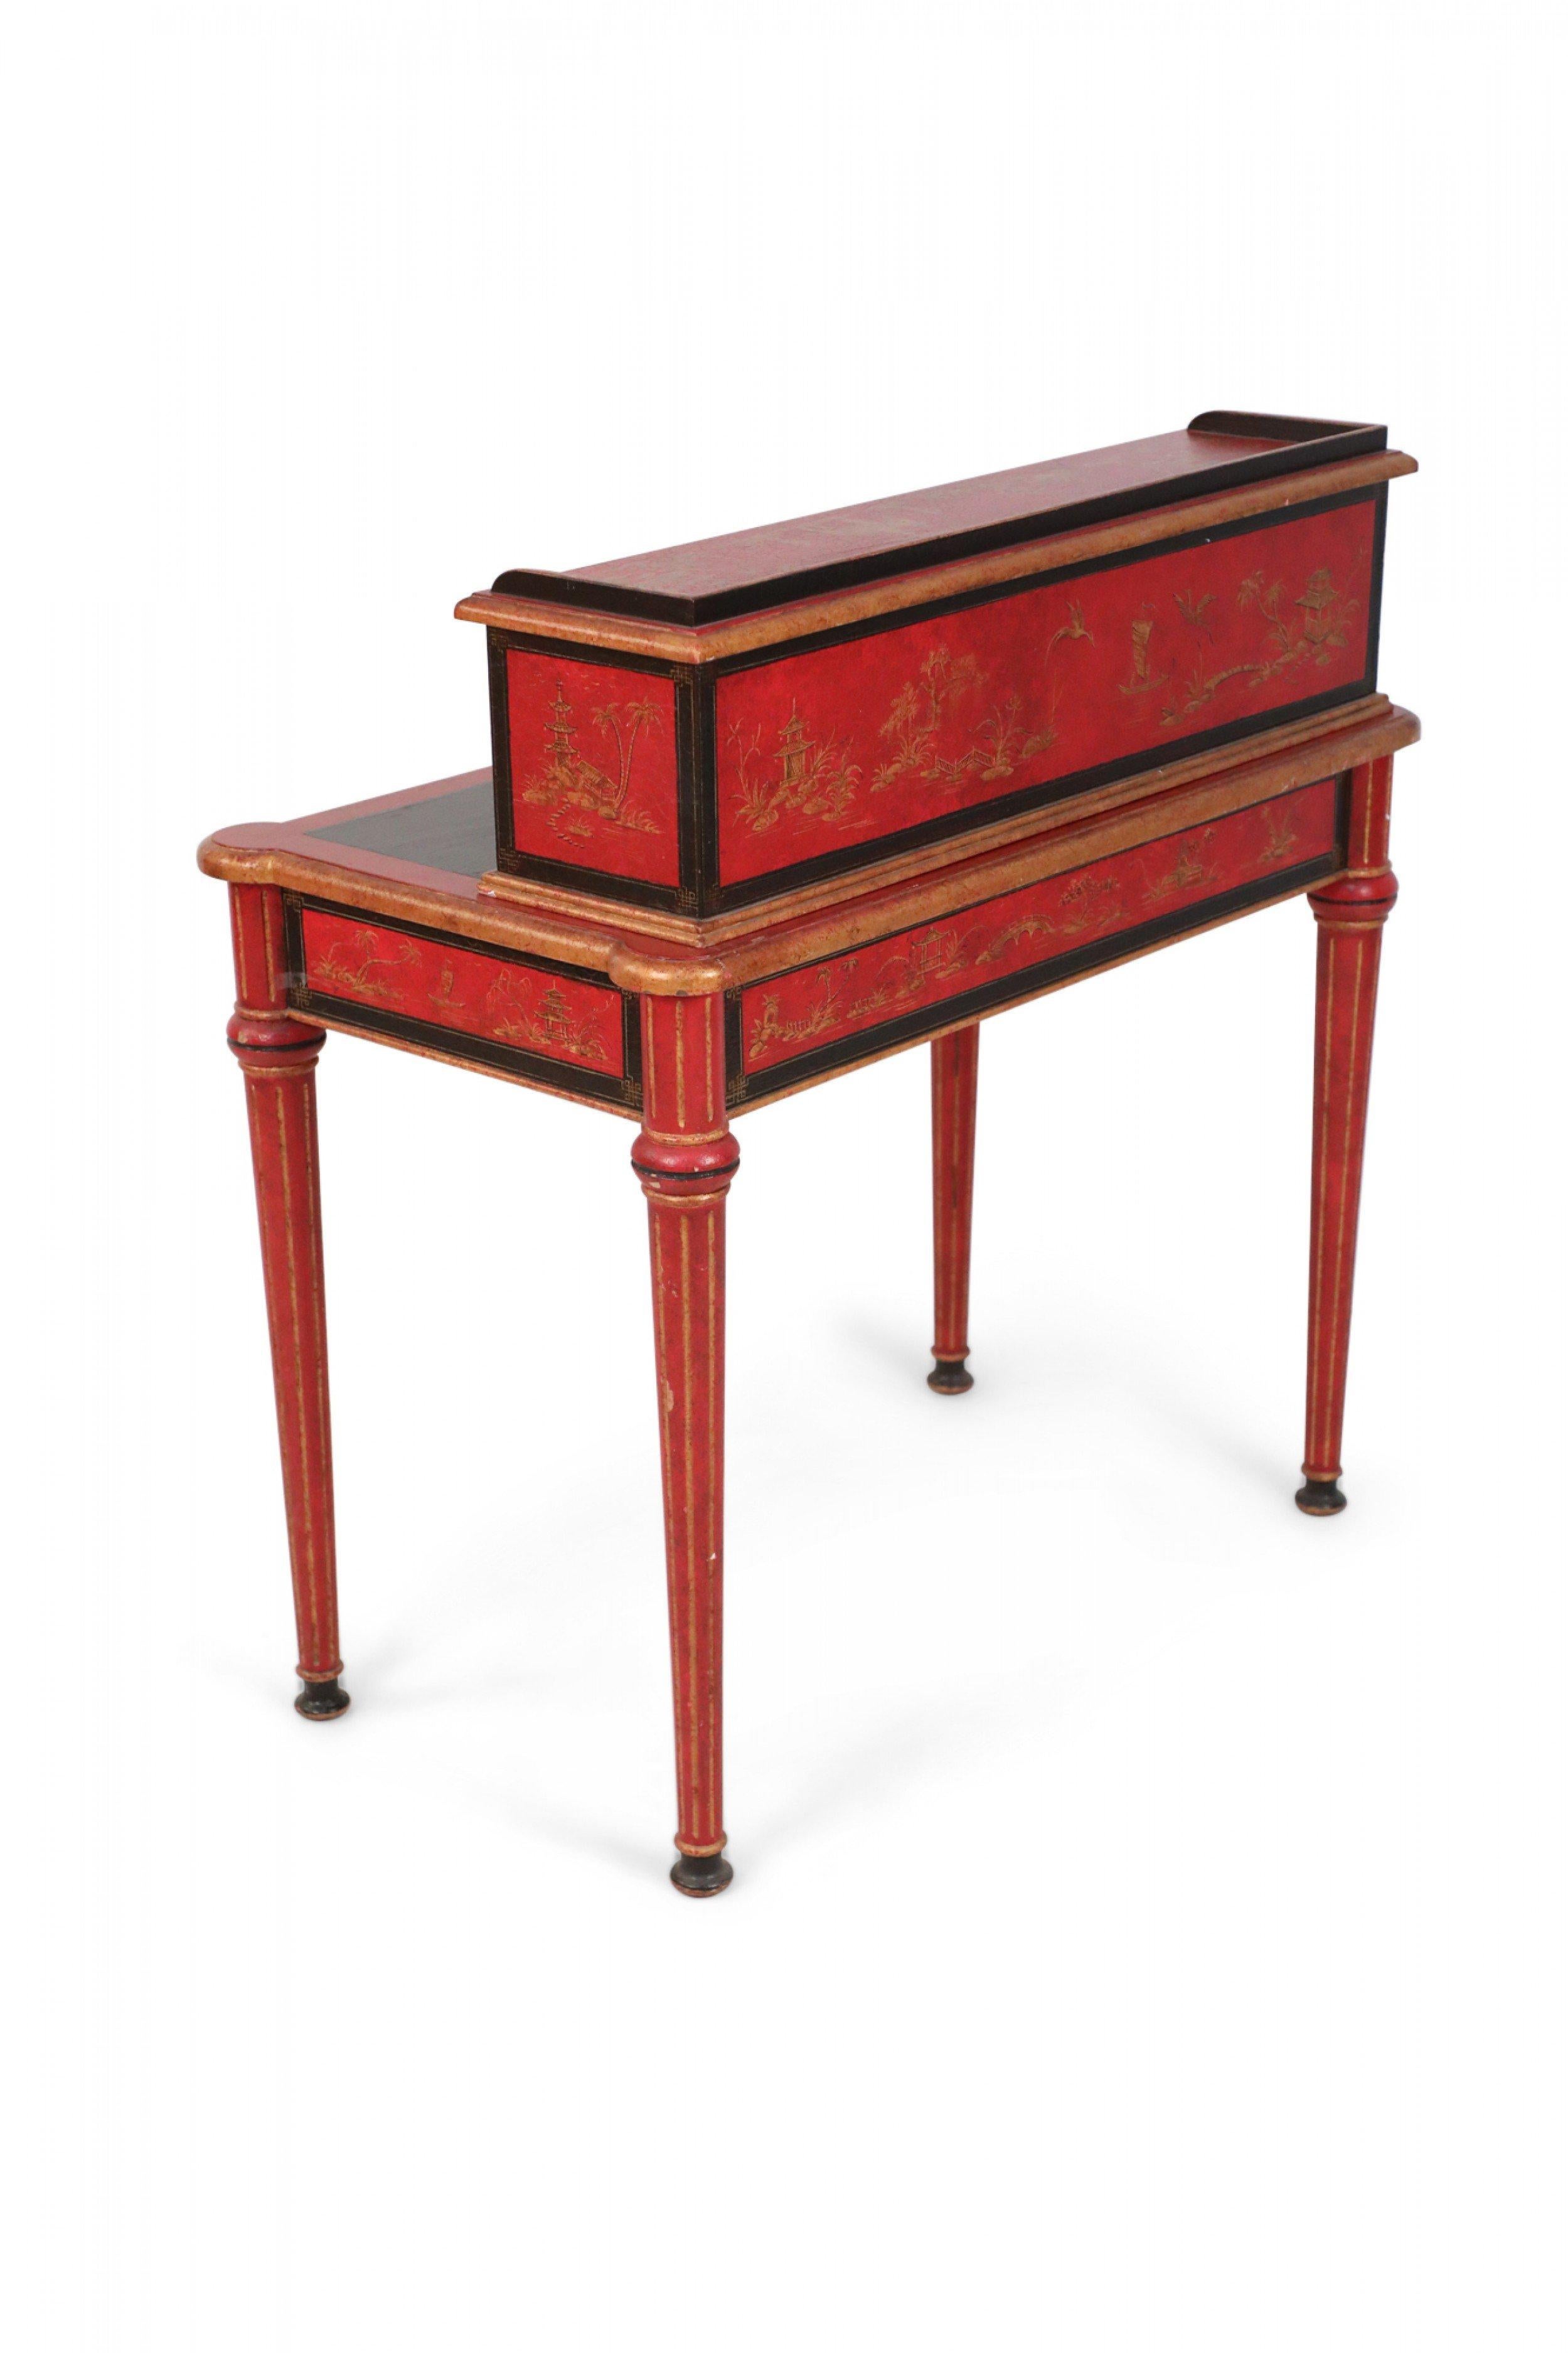 Painted English Chinoiserie / Georgian Style Red and Black Secretary Desk